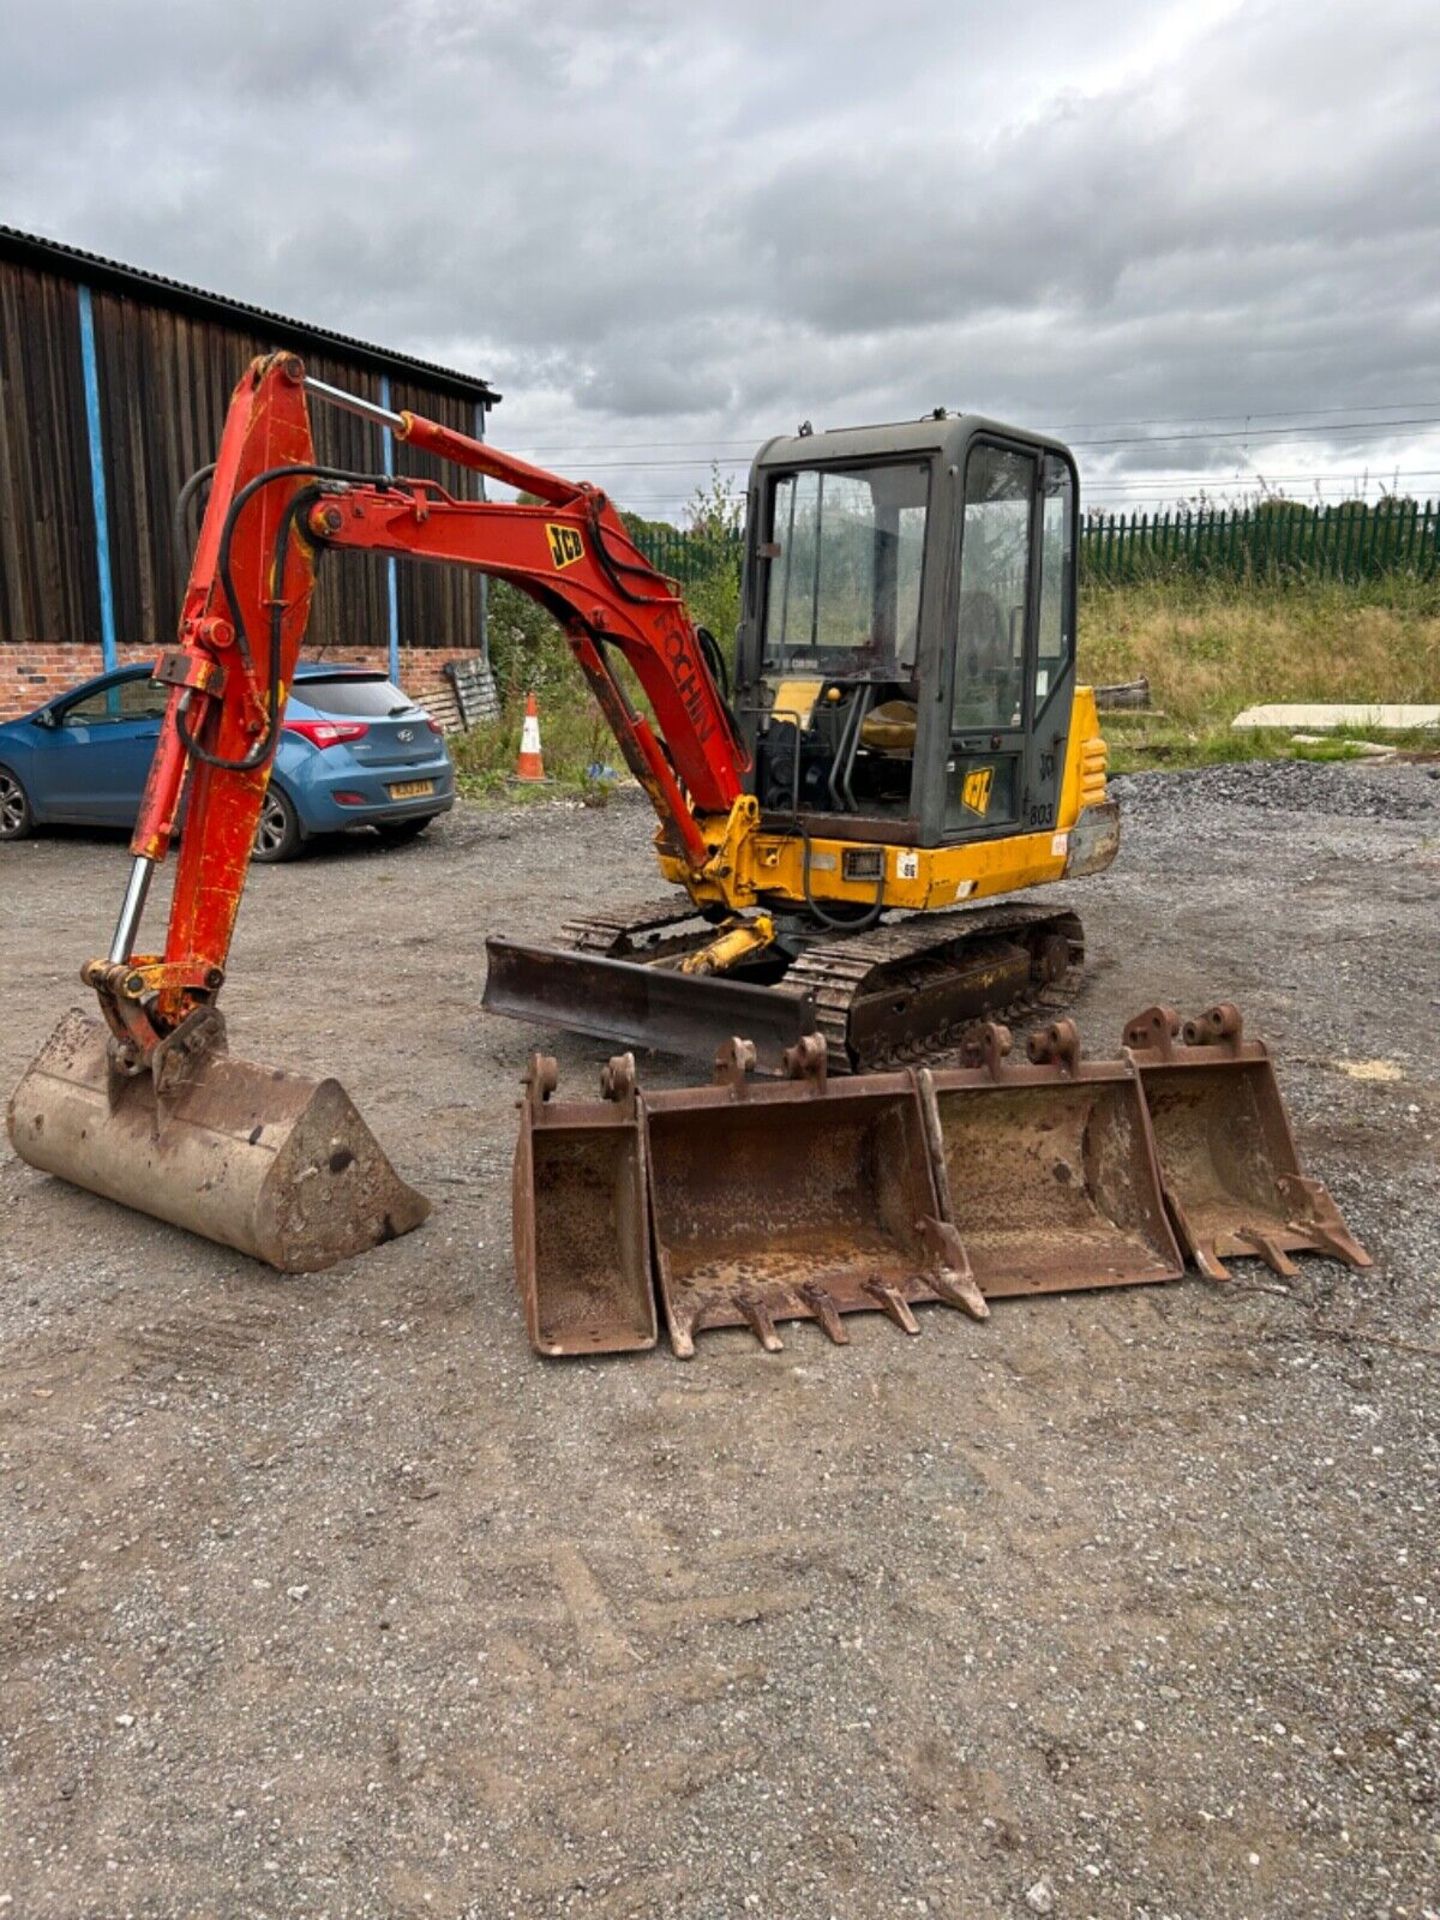 SOLID TRACKS, STRONG DIGGER: 1994 JCB 803 WITH PERKINS ENGINE - Bild 9 aus 14